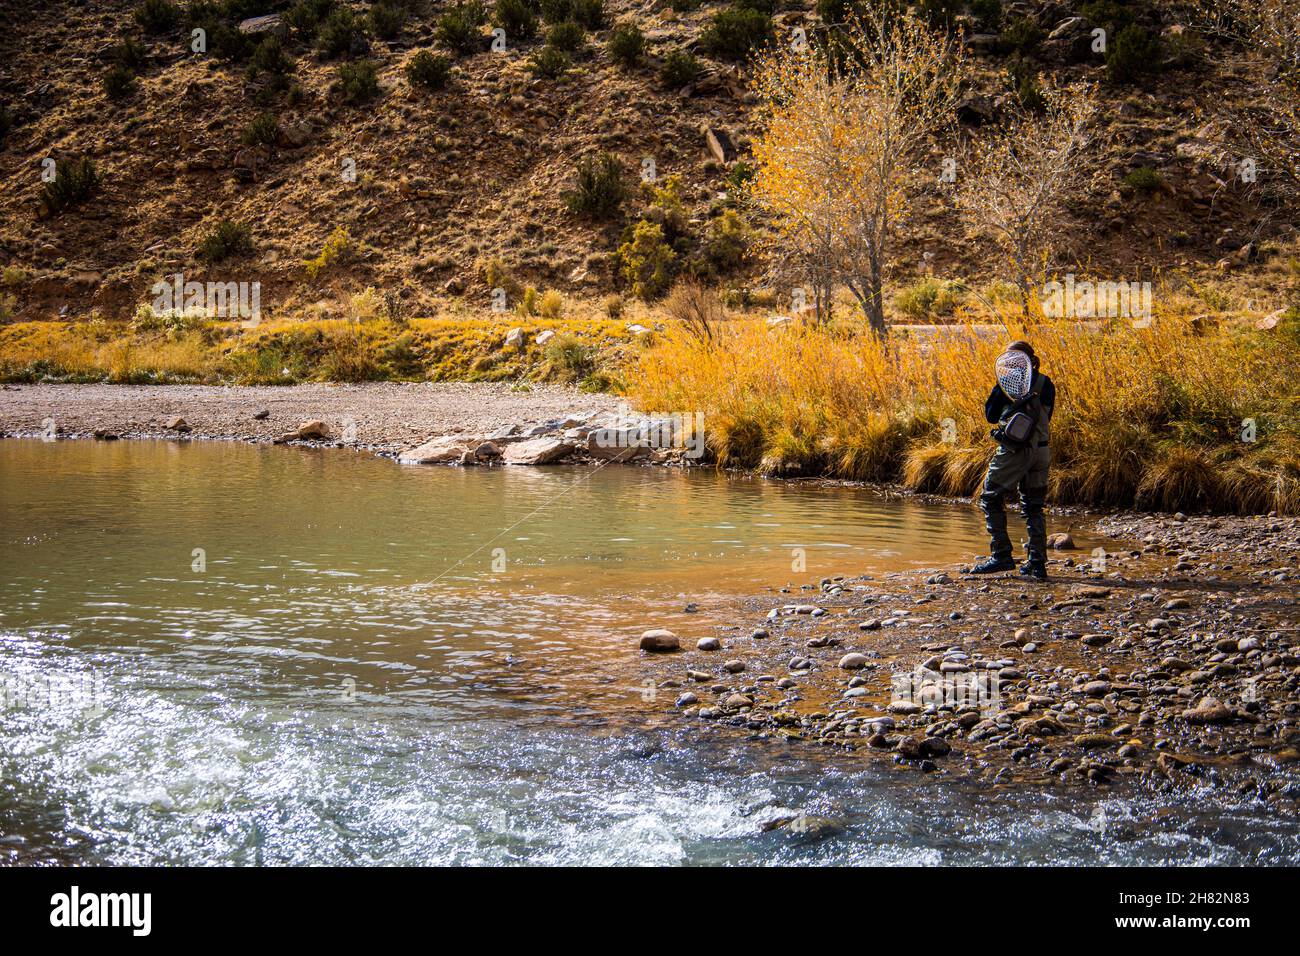 Man reeling in a trout from the Chama river enjoying the beauty of Northern New Mexico, USA Stock Photo